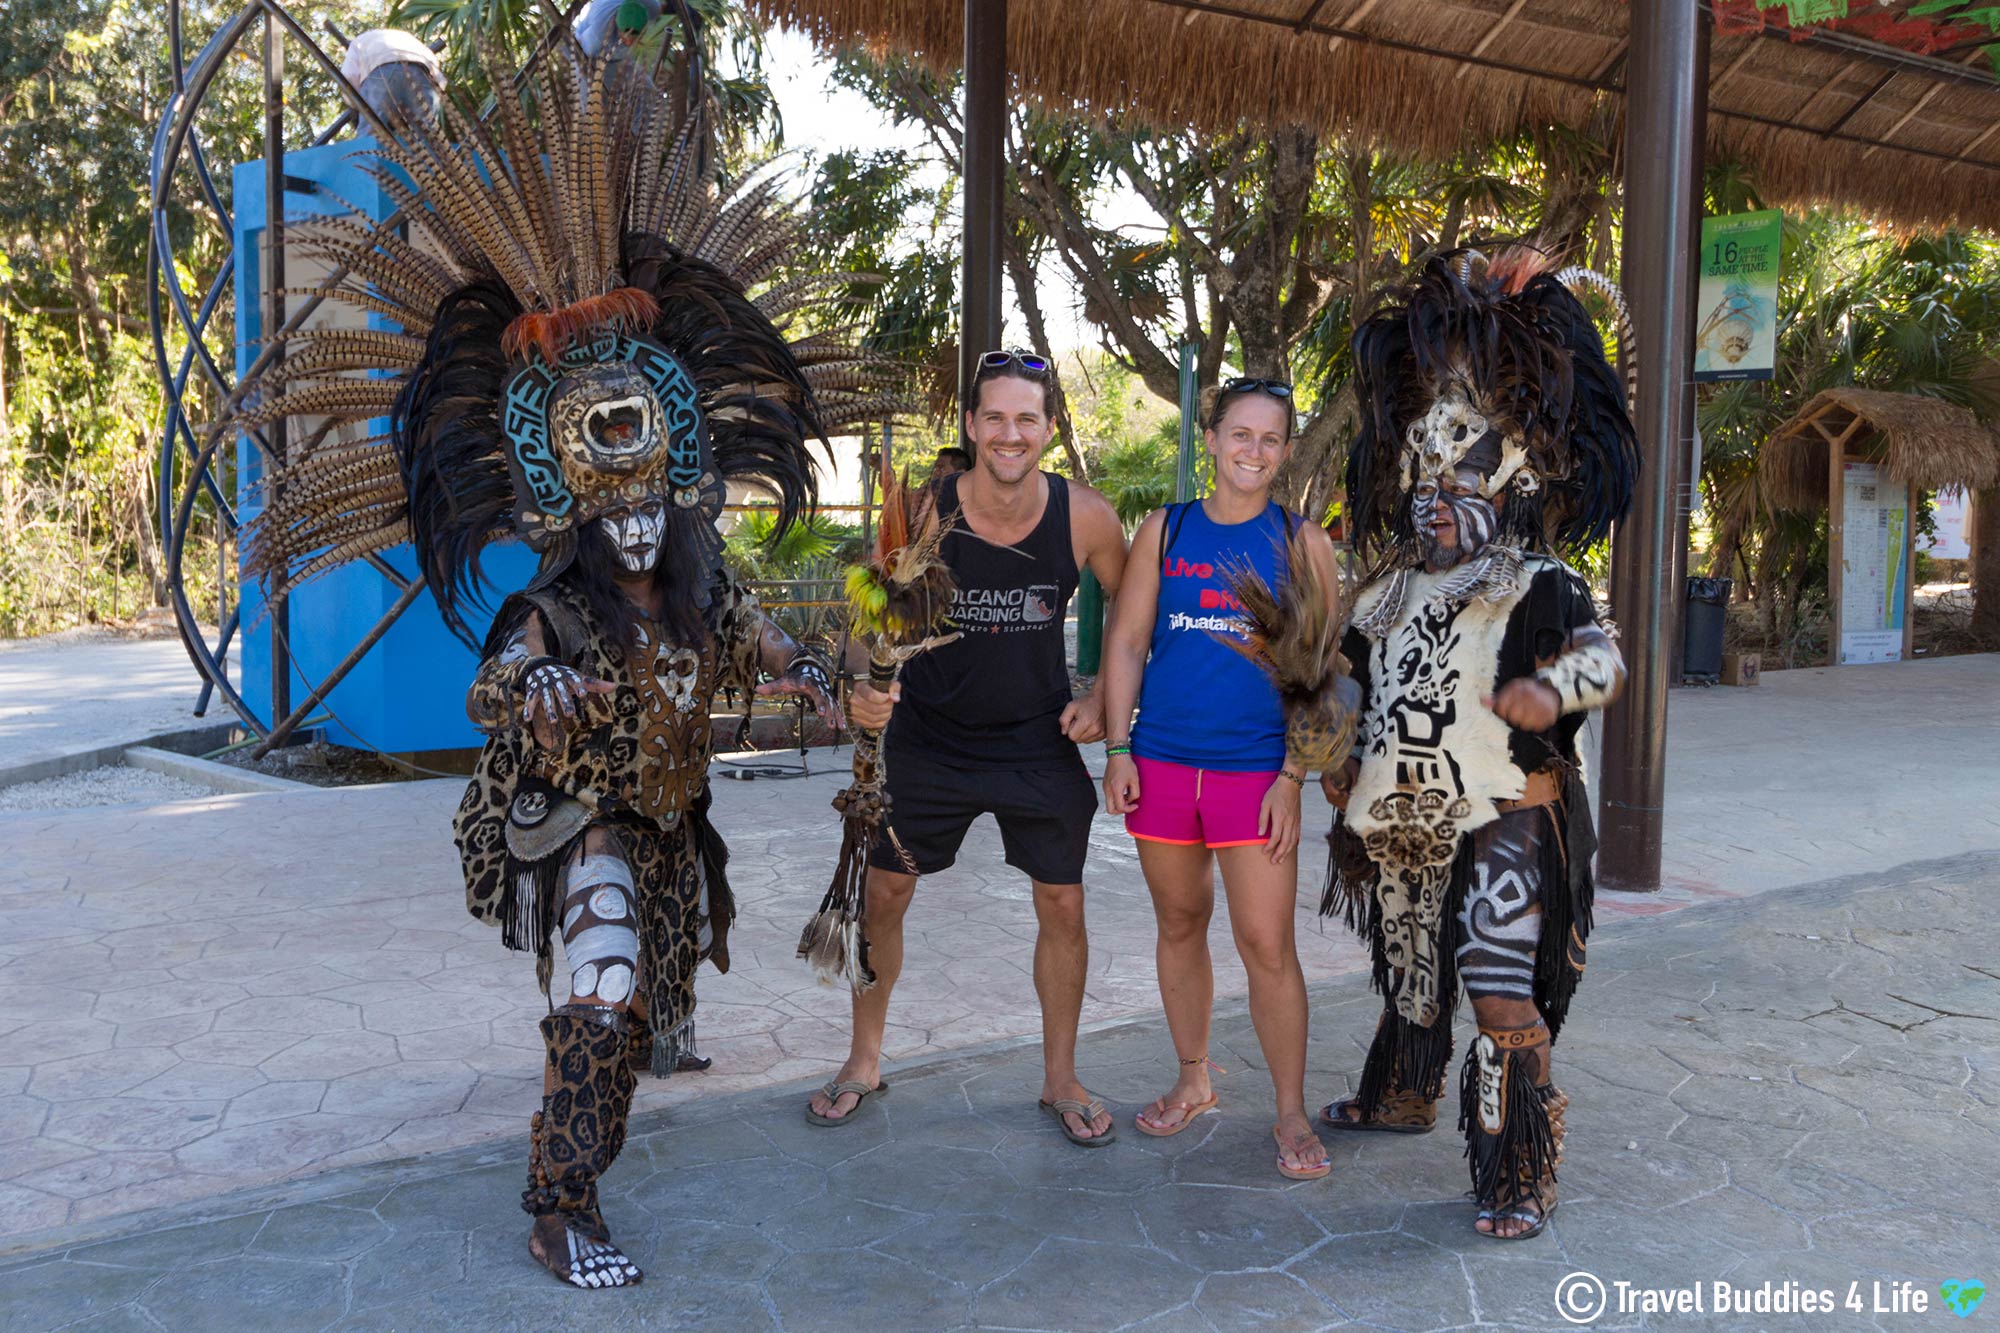 Joey And Ali With Two Dressed Up Mayan People In Mexico